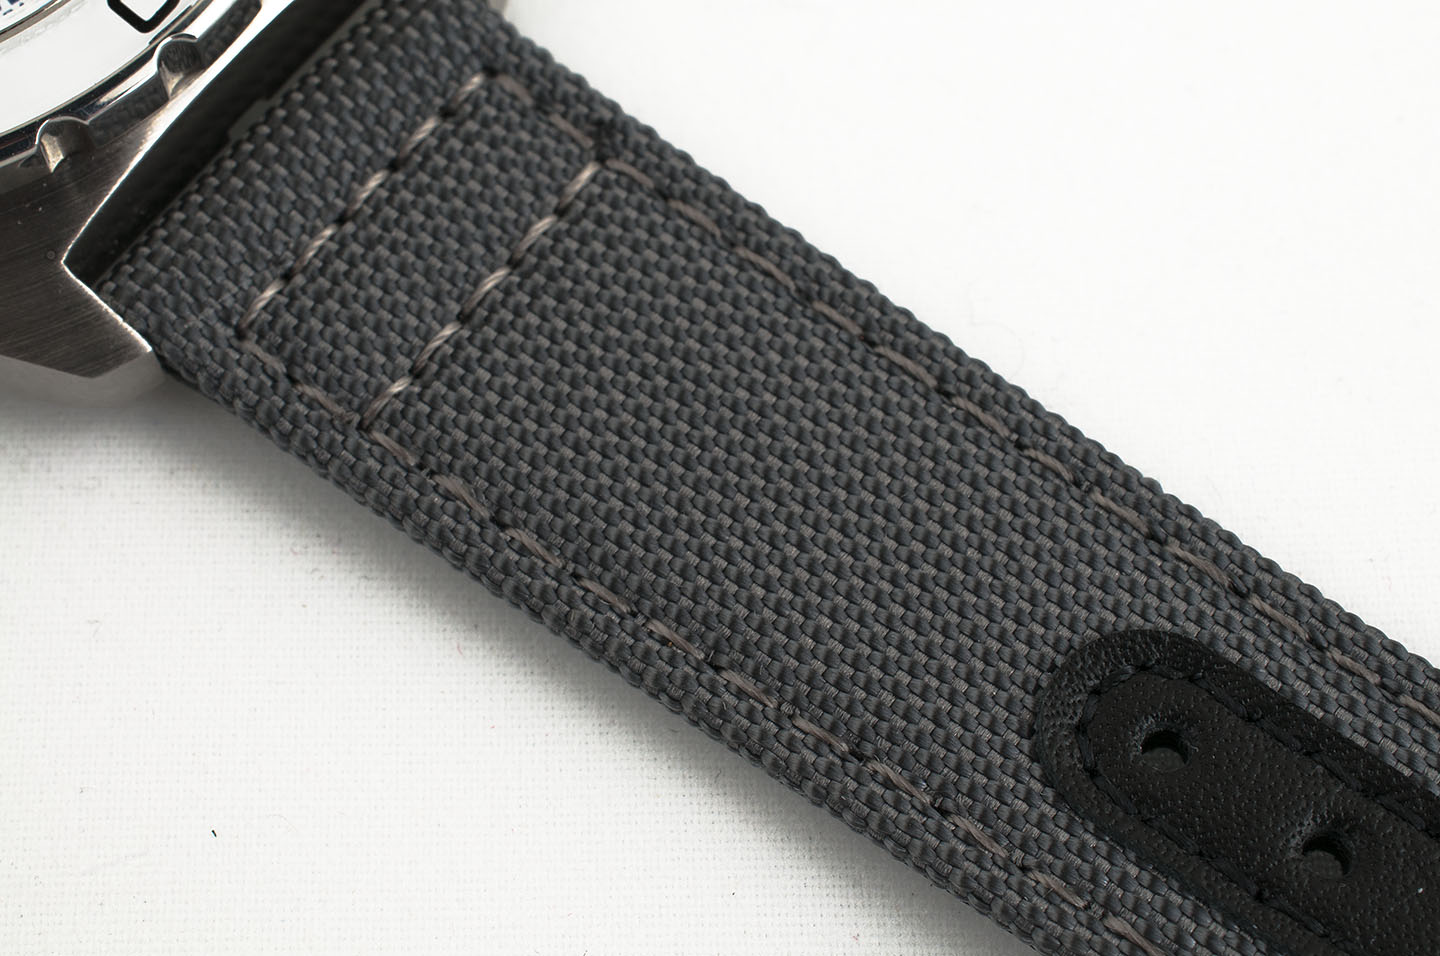 Premium Sailcloth quick release watch strap band replacement 19mm, 20mm, 21mm, 22mm gray grey